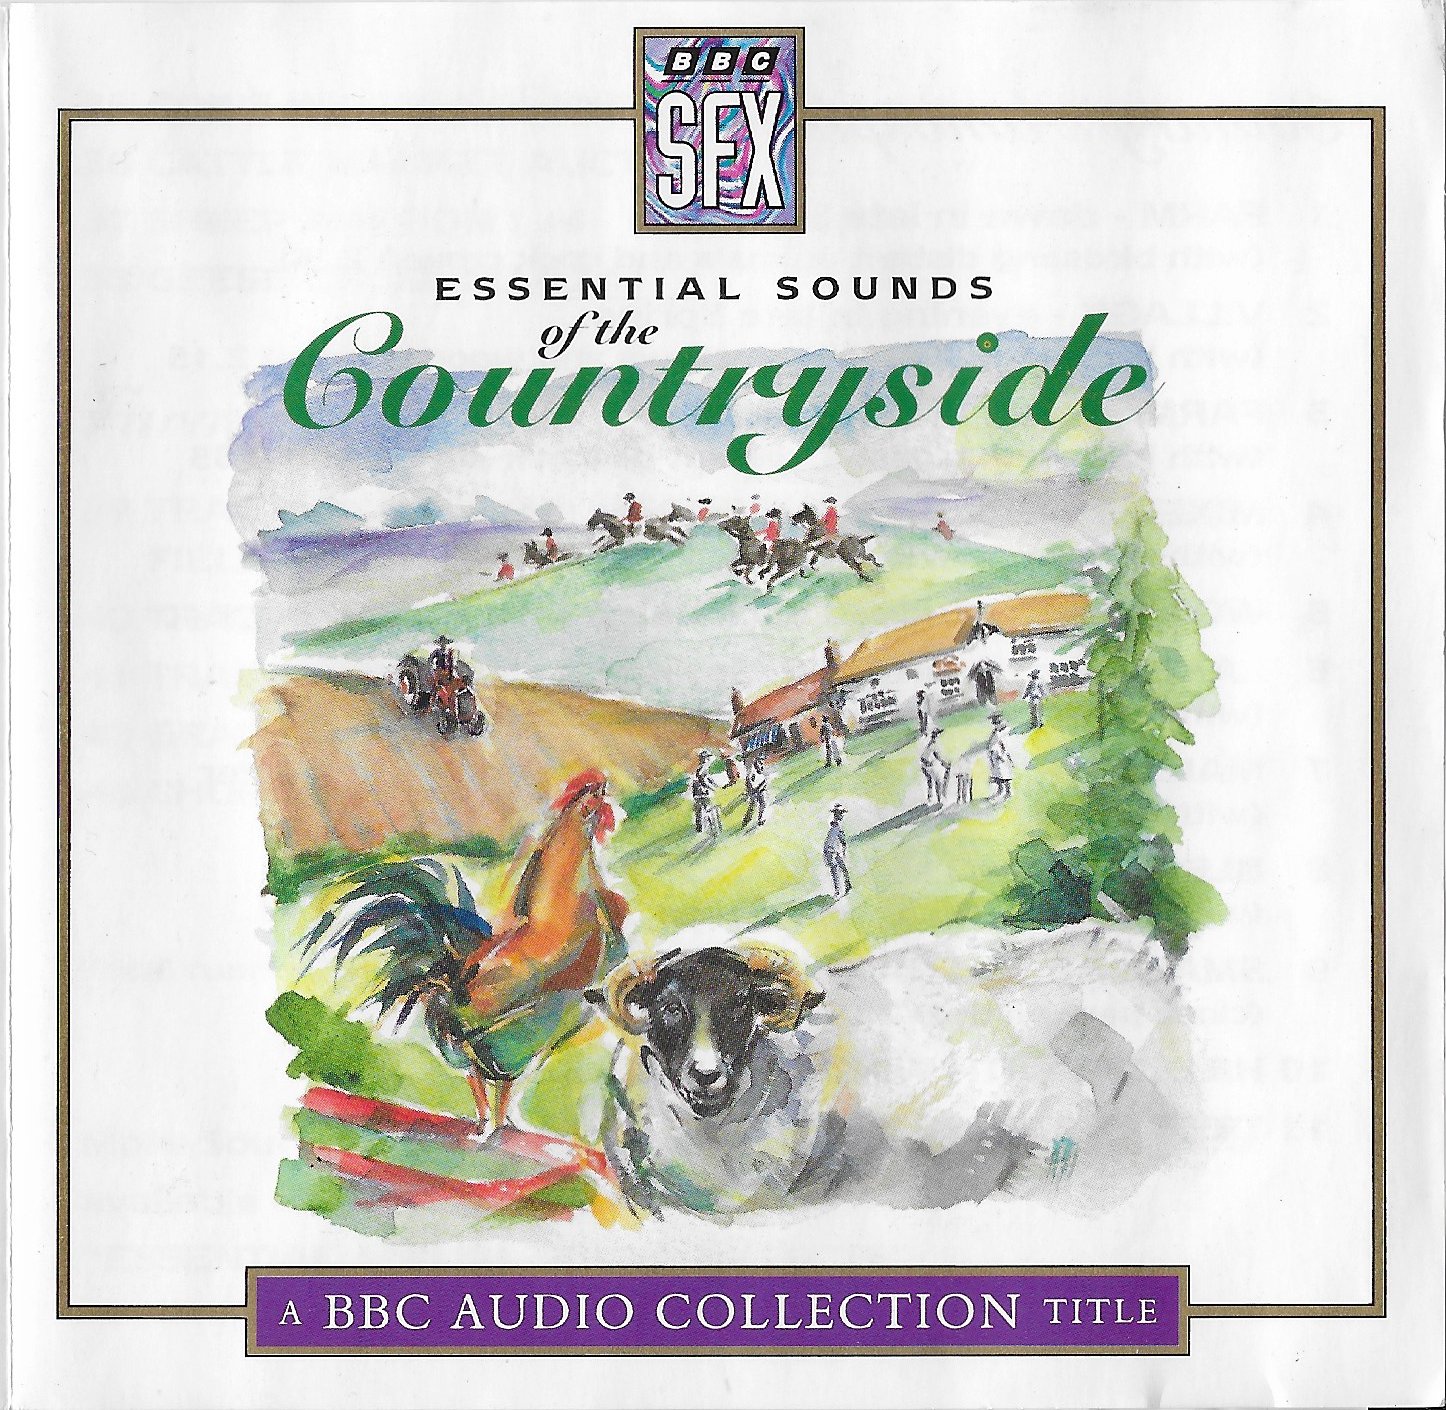 Picture of BBCCD861 Essential sounds of the countryside by artist Various from the BBC cds - Records and Tapes library